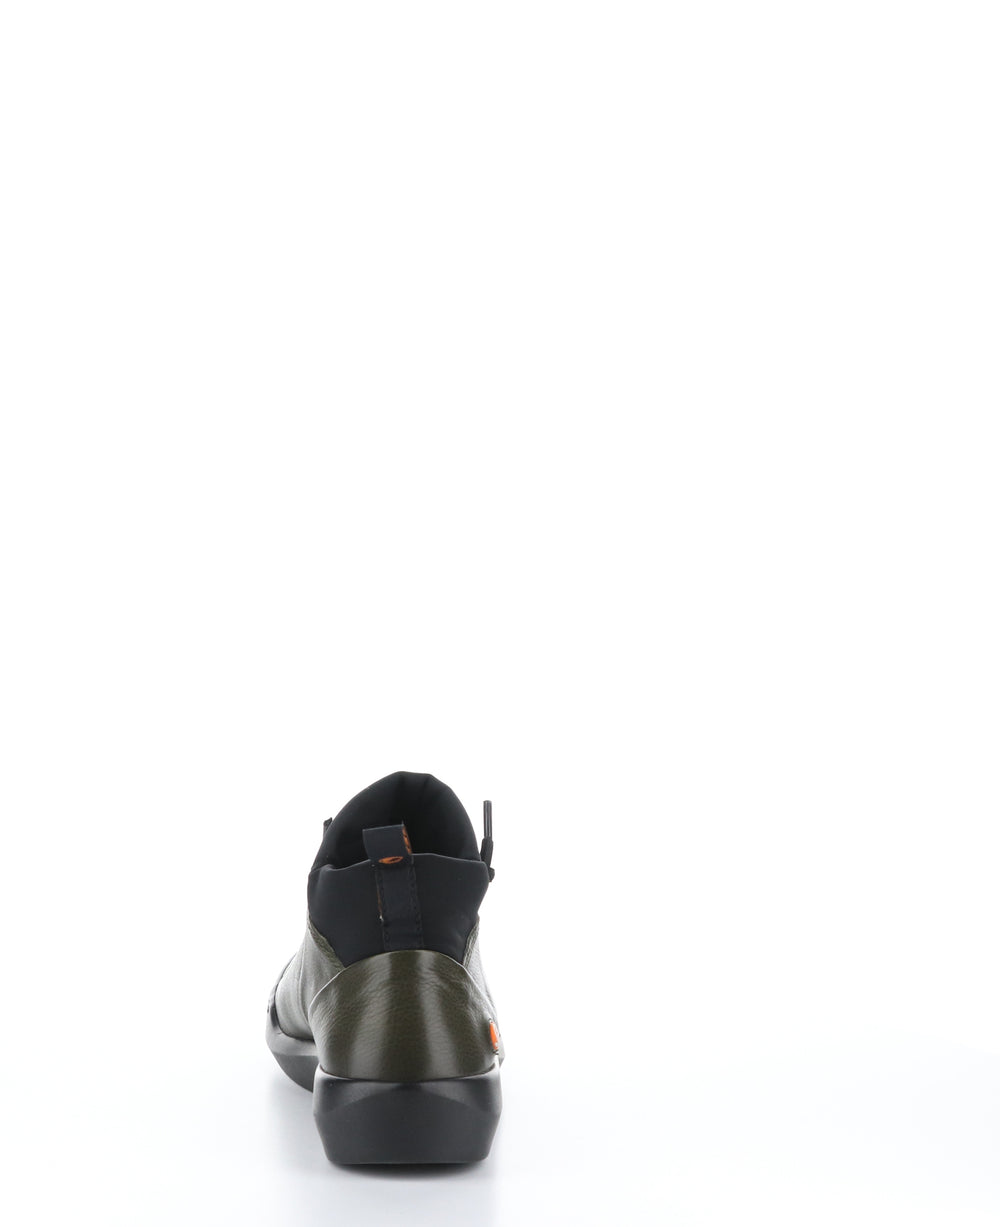 BIEL549SOF Army/Black Round Toe Shoes|BIEL549SOF Chaussures à Bout Rond in Vert